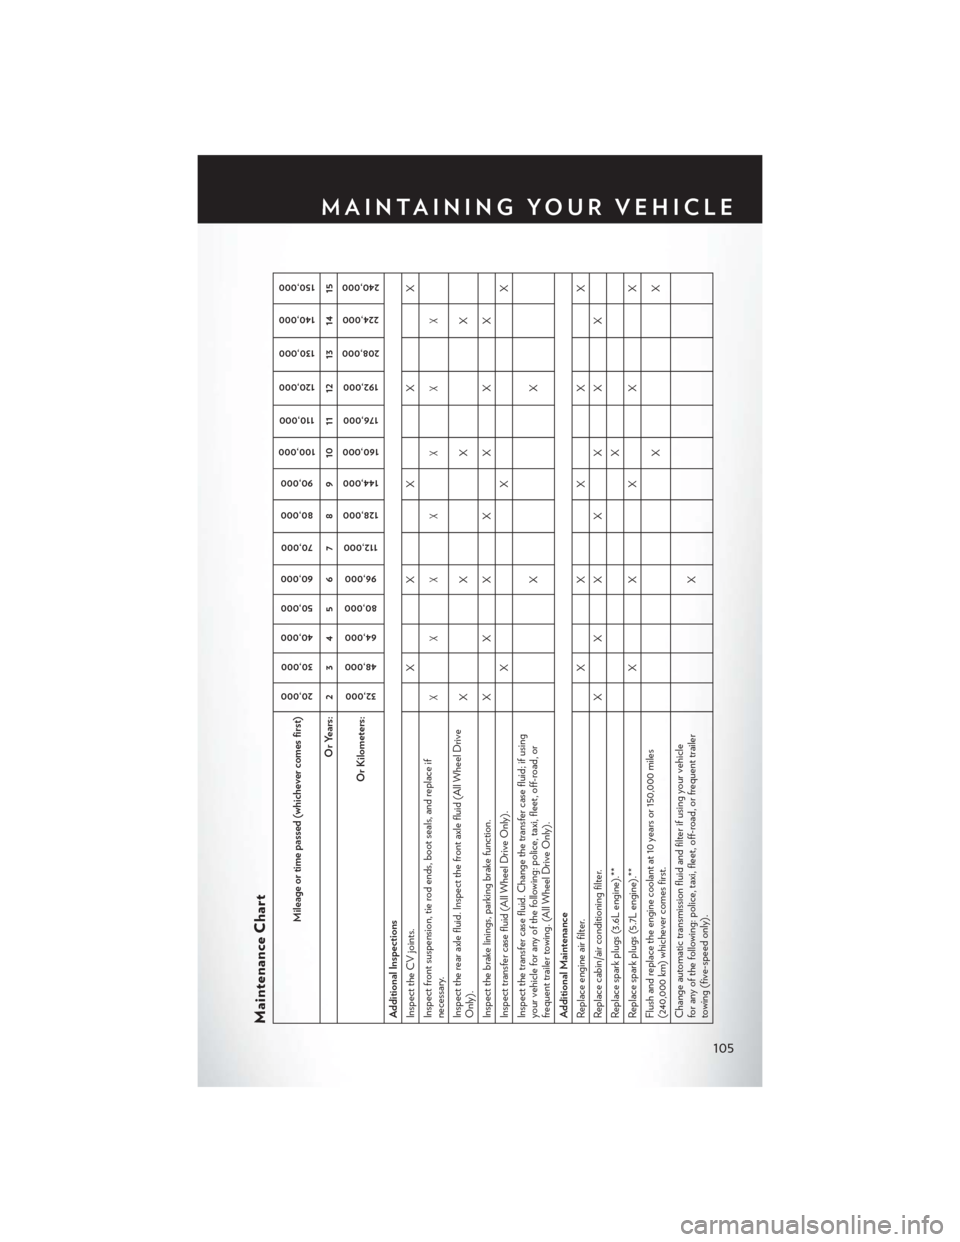 CHRYSLER 300 2013 2.G User Guide Maintenance Chart
Mileage or time passed (whichever comes first)
20,00030,000
40,000 50,000
60,000
70,000
80,000 90,000
100,000
110,000
120,000
130,000
140,000 150,000
Or Years: 2 3 4 5 6 7 8 9 10 11 